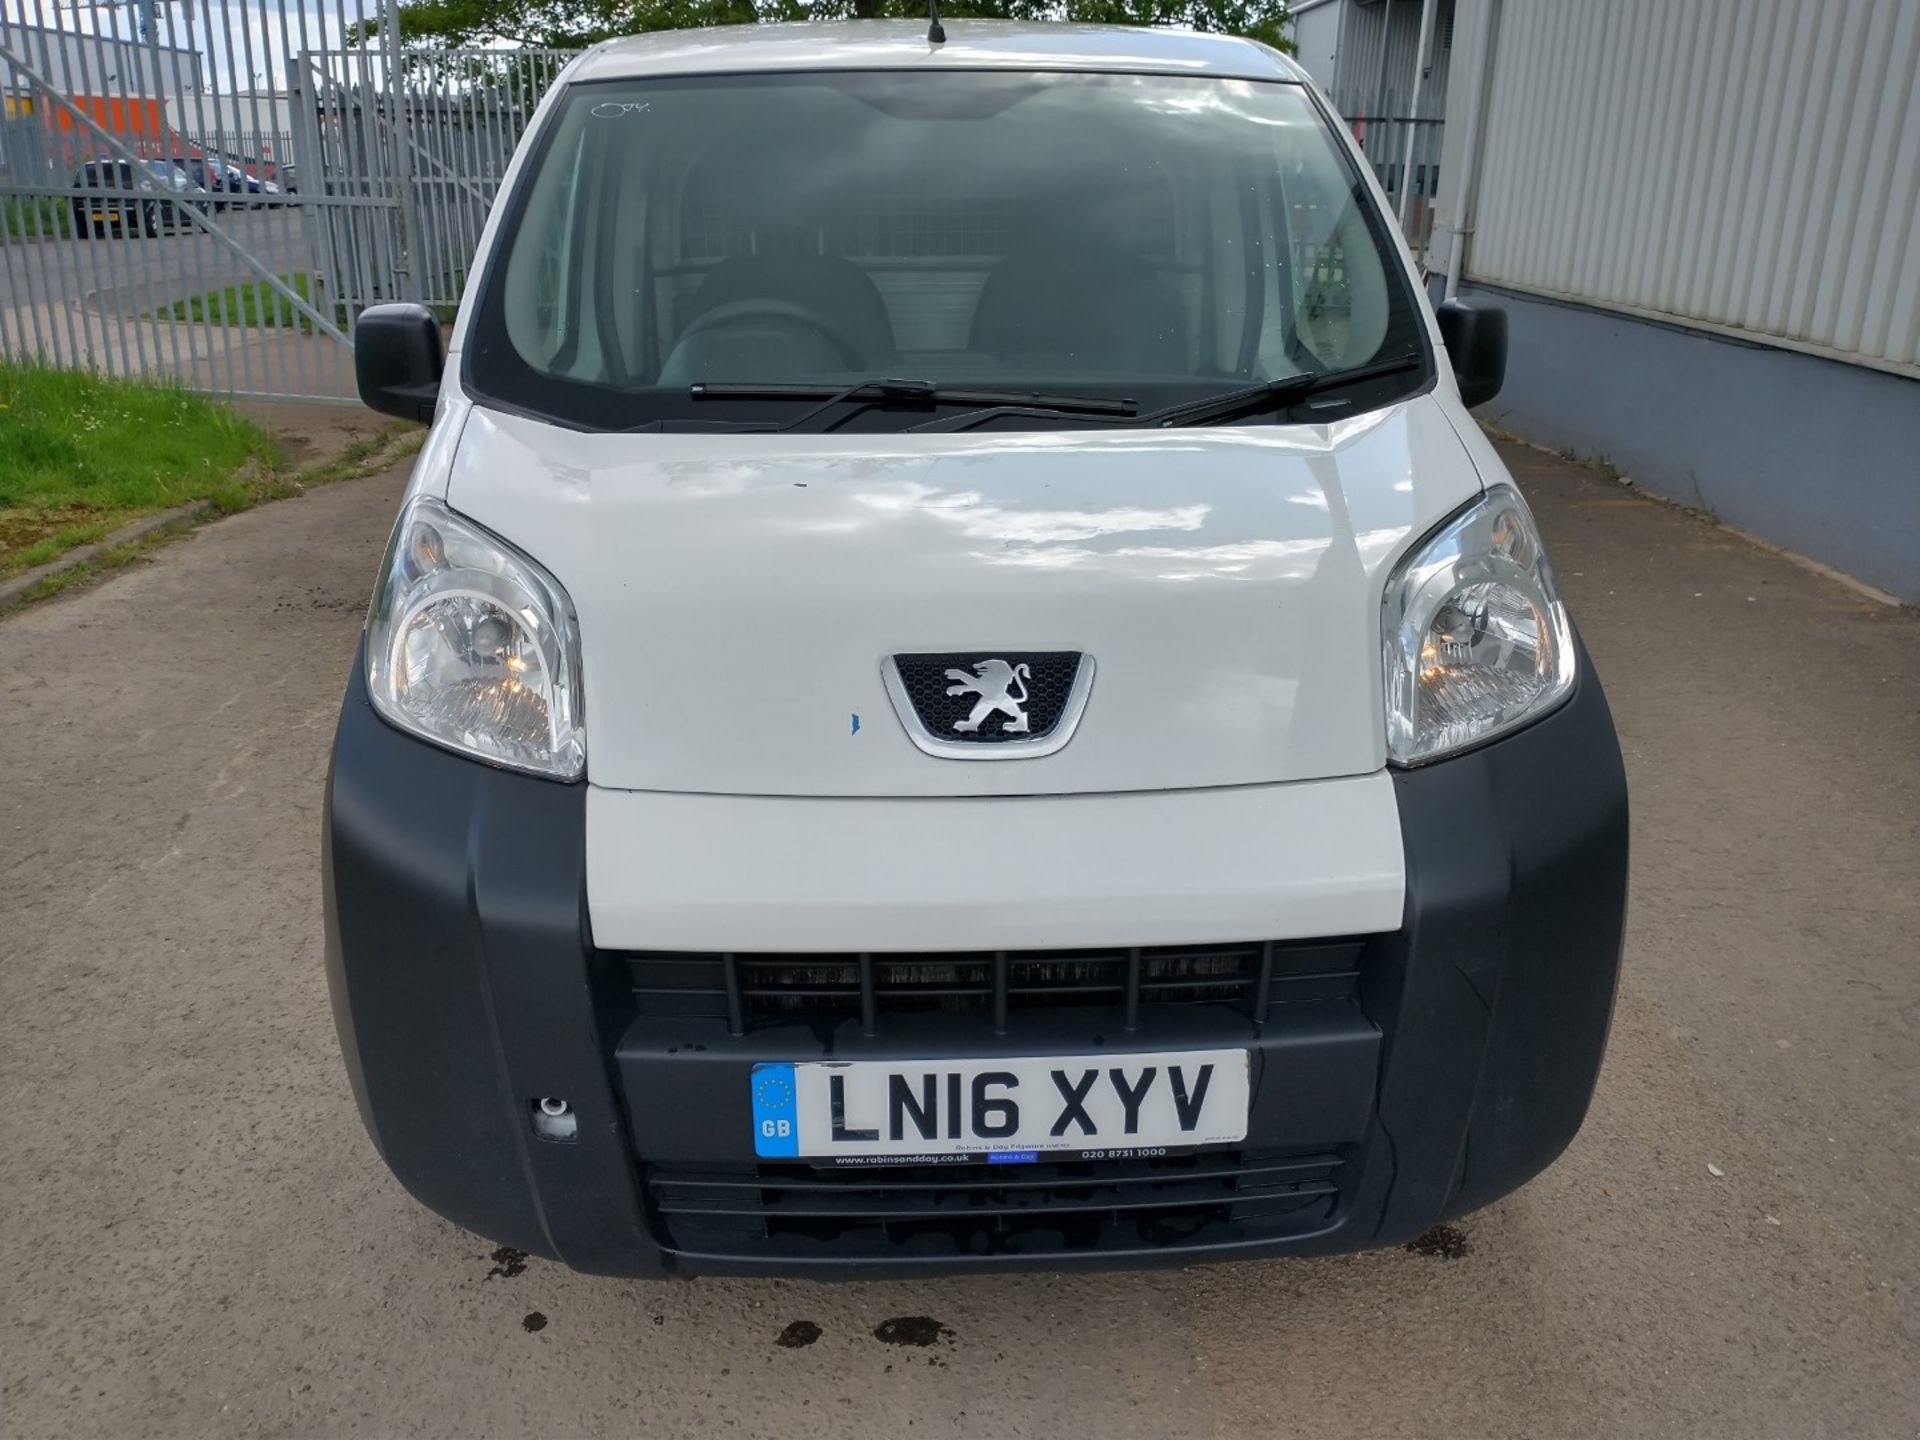 2016 Peugeot Bipper S Hdi Panel van - CL505 - Location: Corby - Image 6 of 15